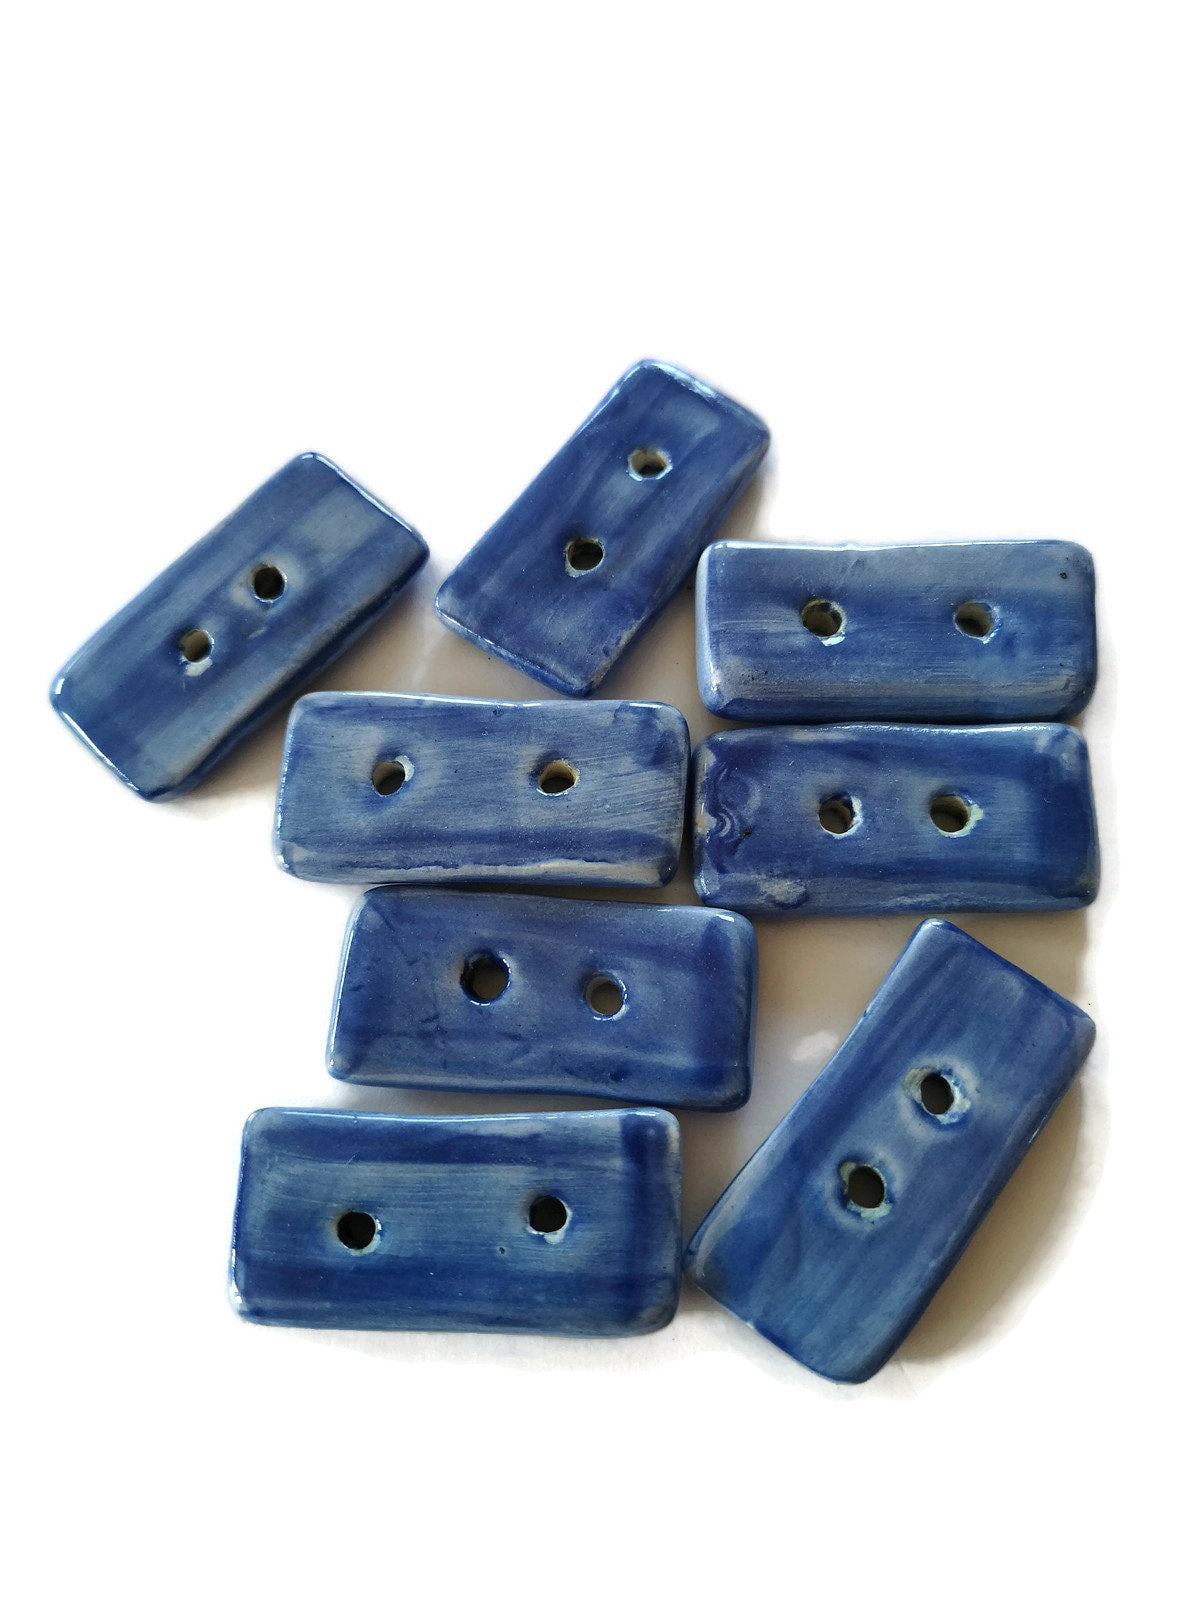 2Pc 40mm Blue Rectangular Handmade Ceramic Sewing Buttons For Crafts, Novelty Extra Large Buttons, Unique Sewing Supplies And Notions - Ceramica Ana Rafael